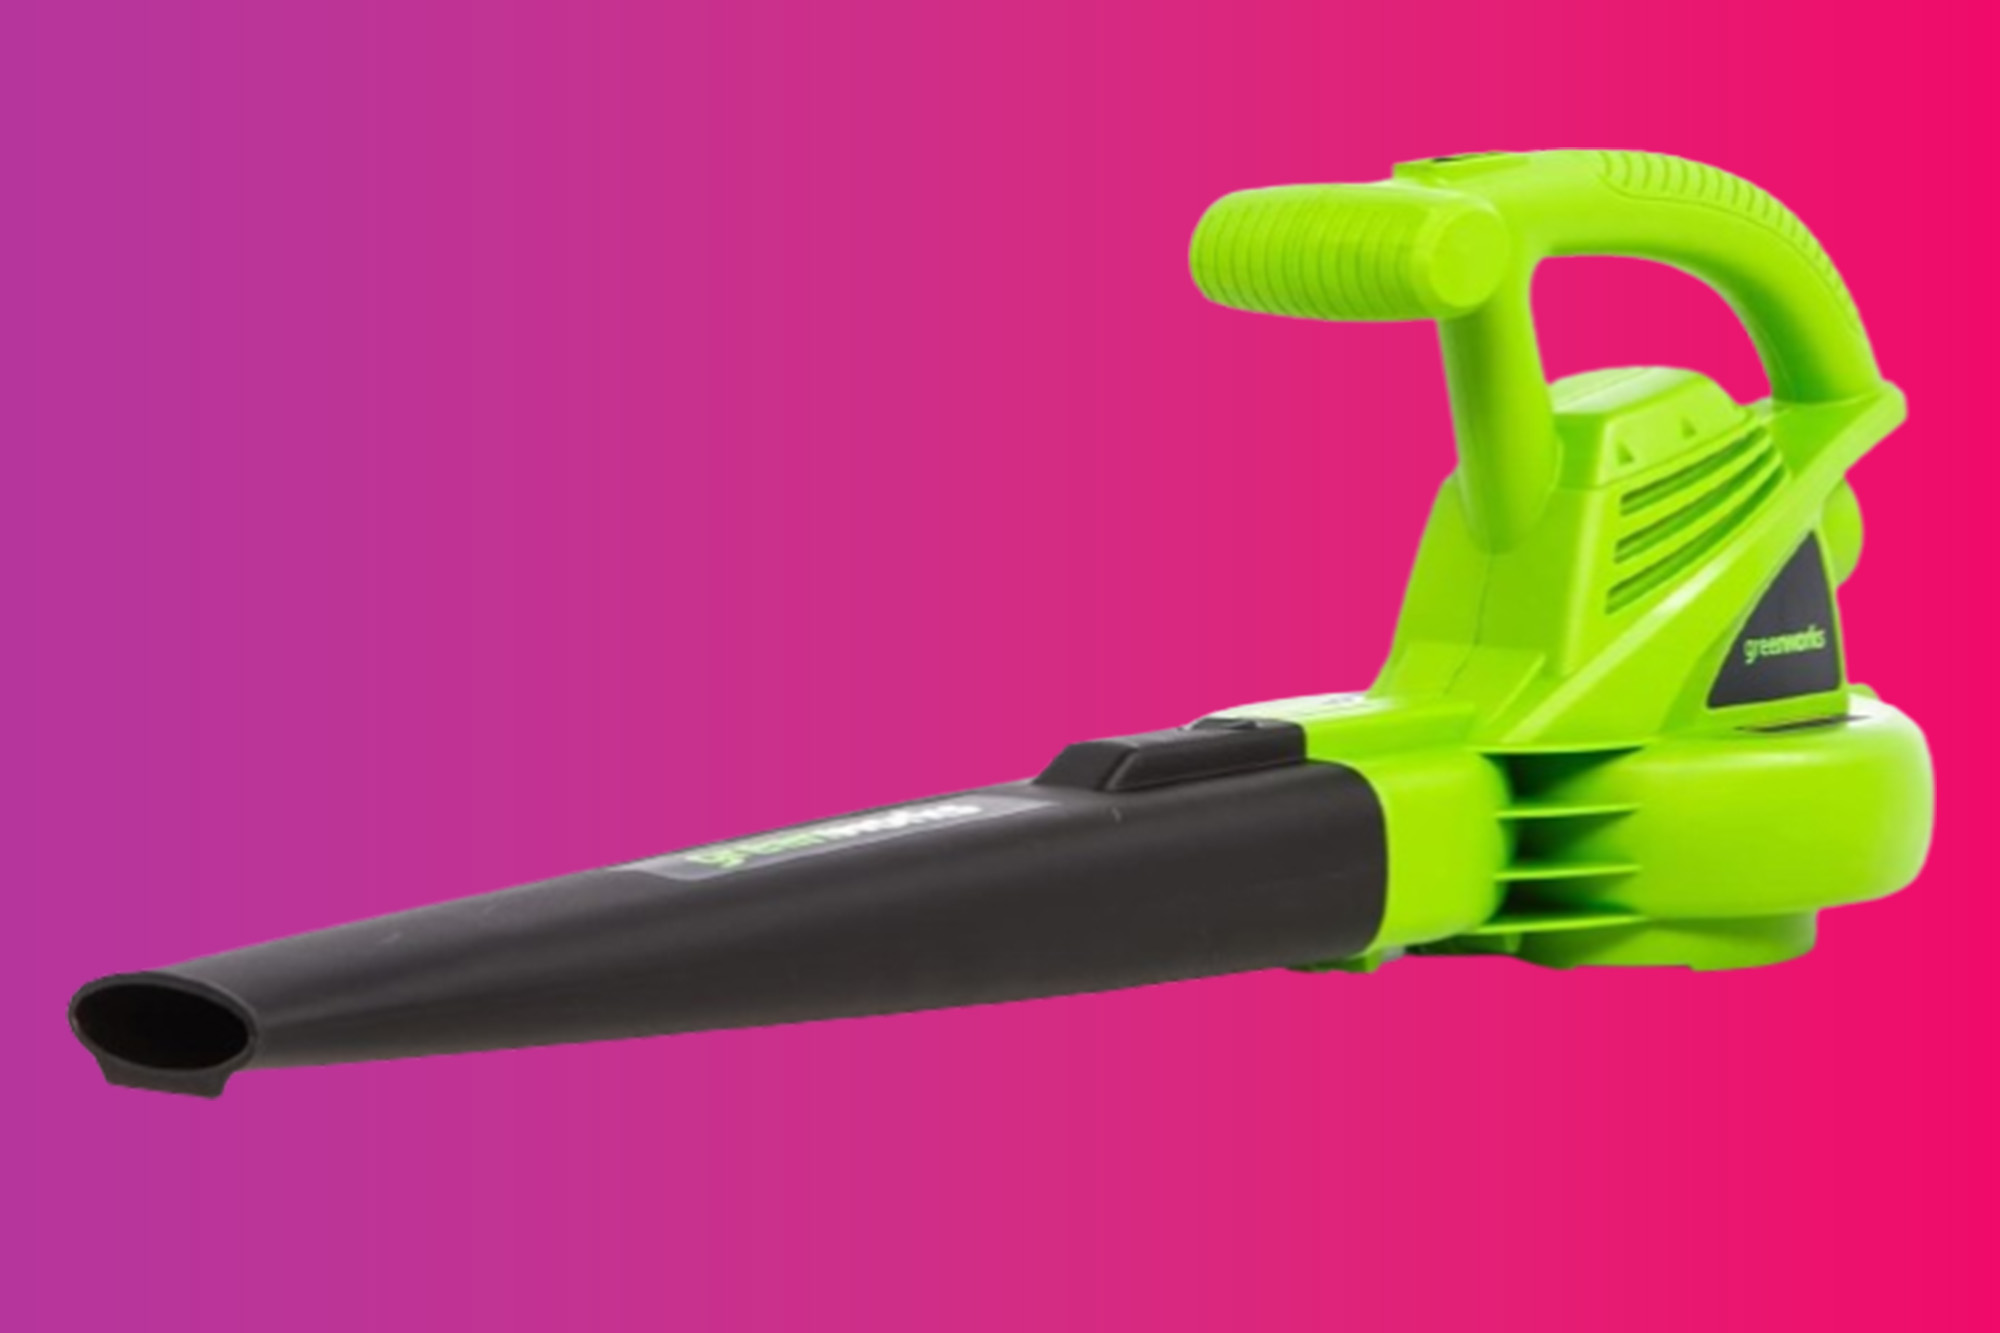 Make fall cleanup a breeze with 20% off Greenworks tools at